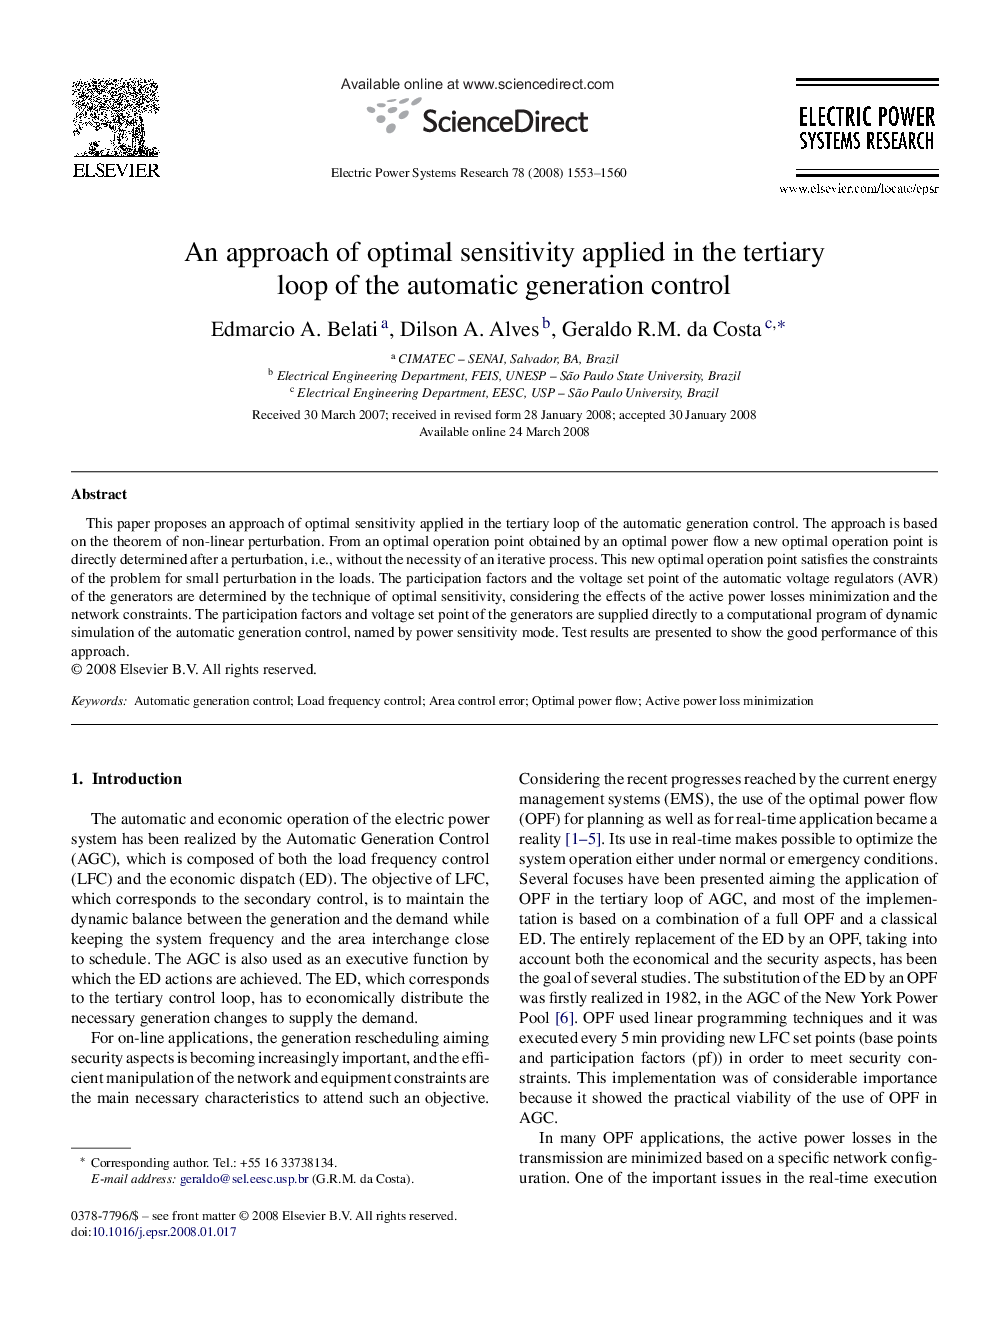 An approach of optimal sensitivity applied in the tertiary loop of the automatic generation control